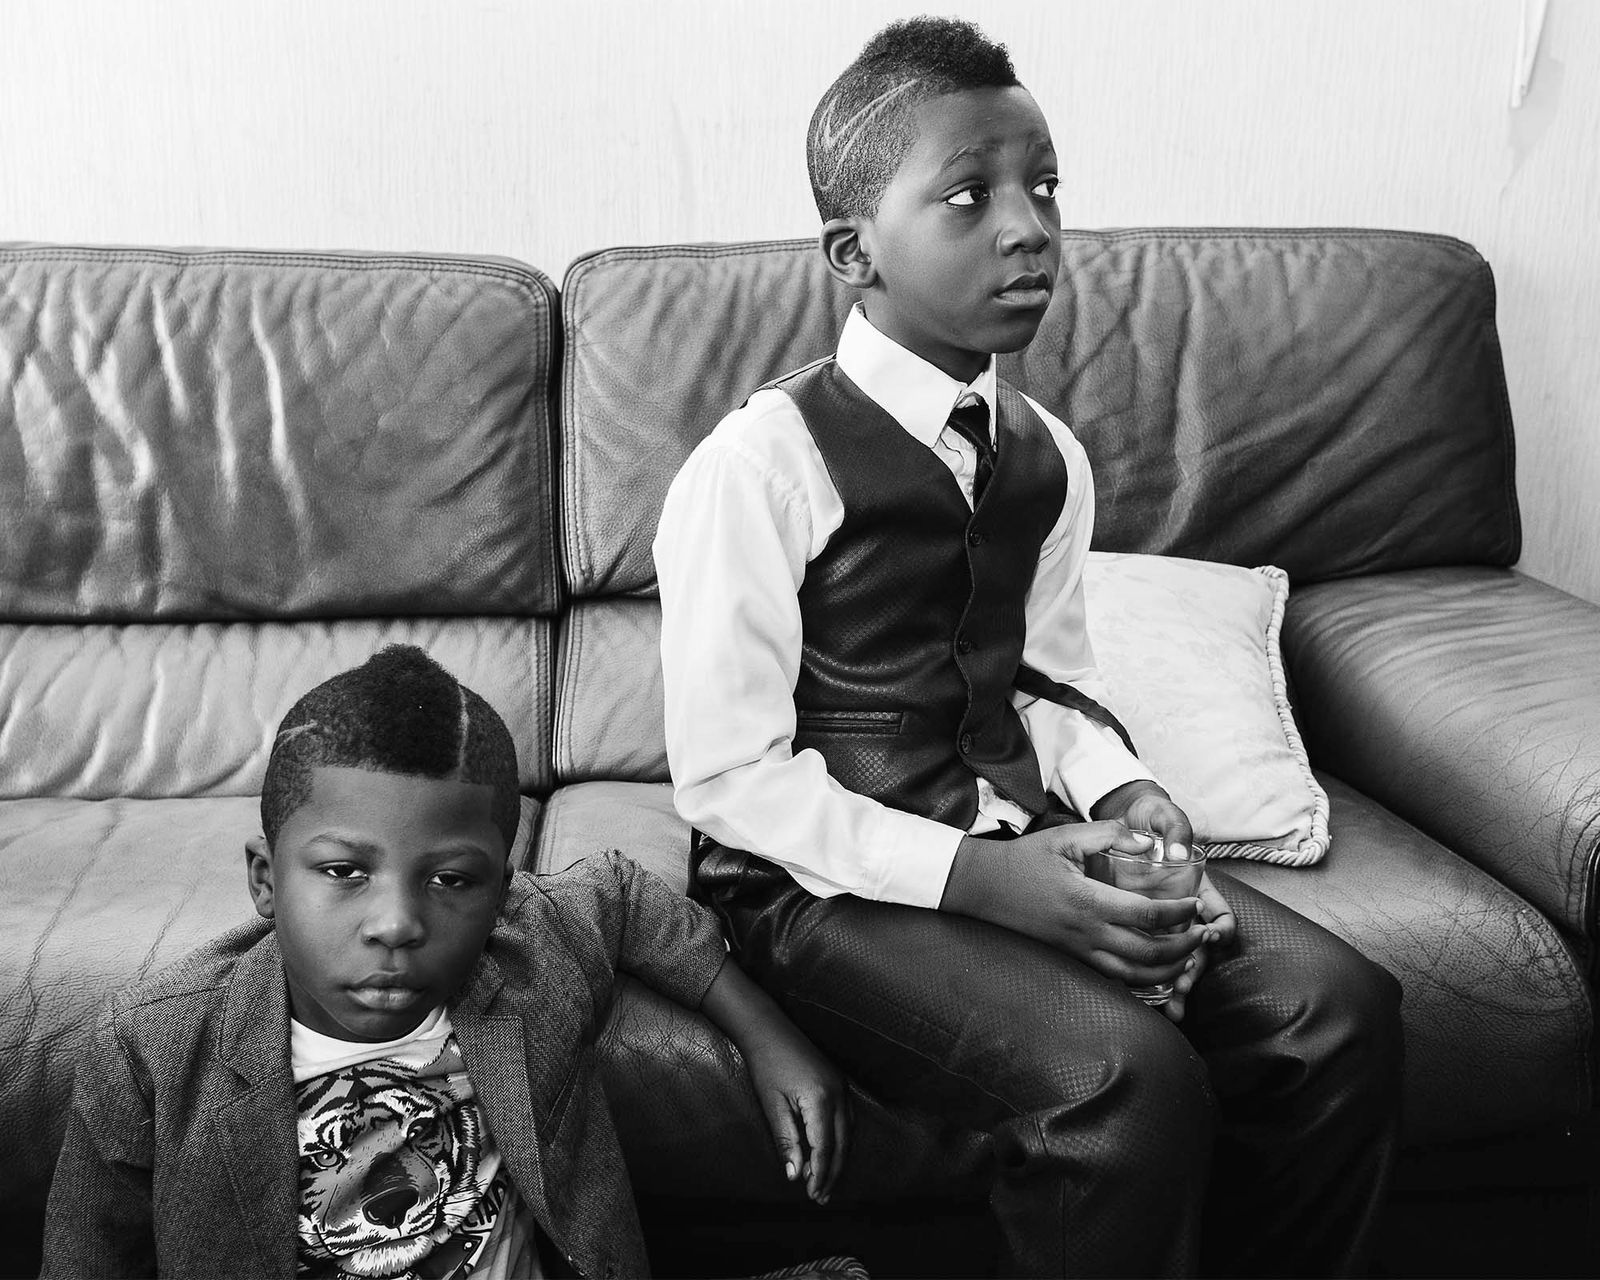 © Rebecca  Fertinel - Boys are waiting between ceremonies in their house